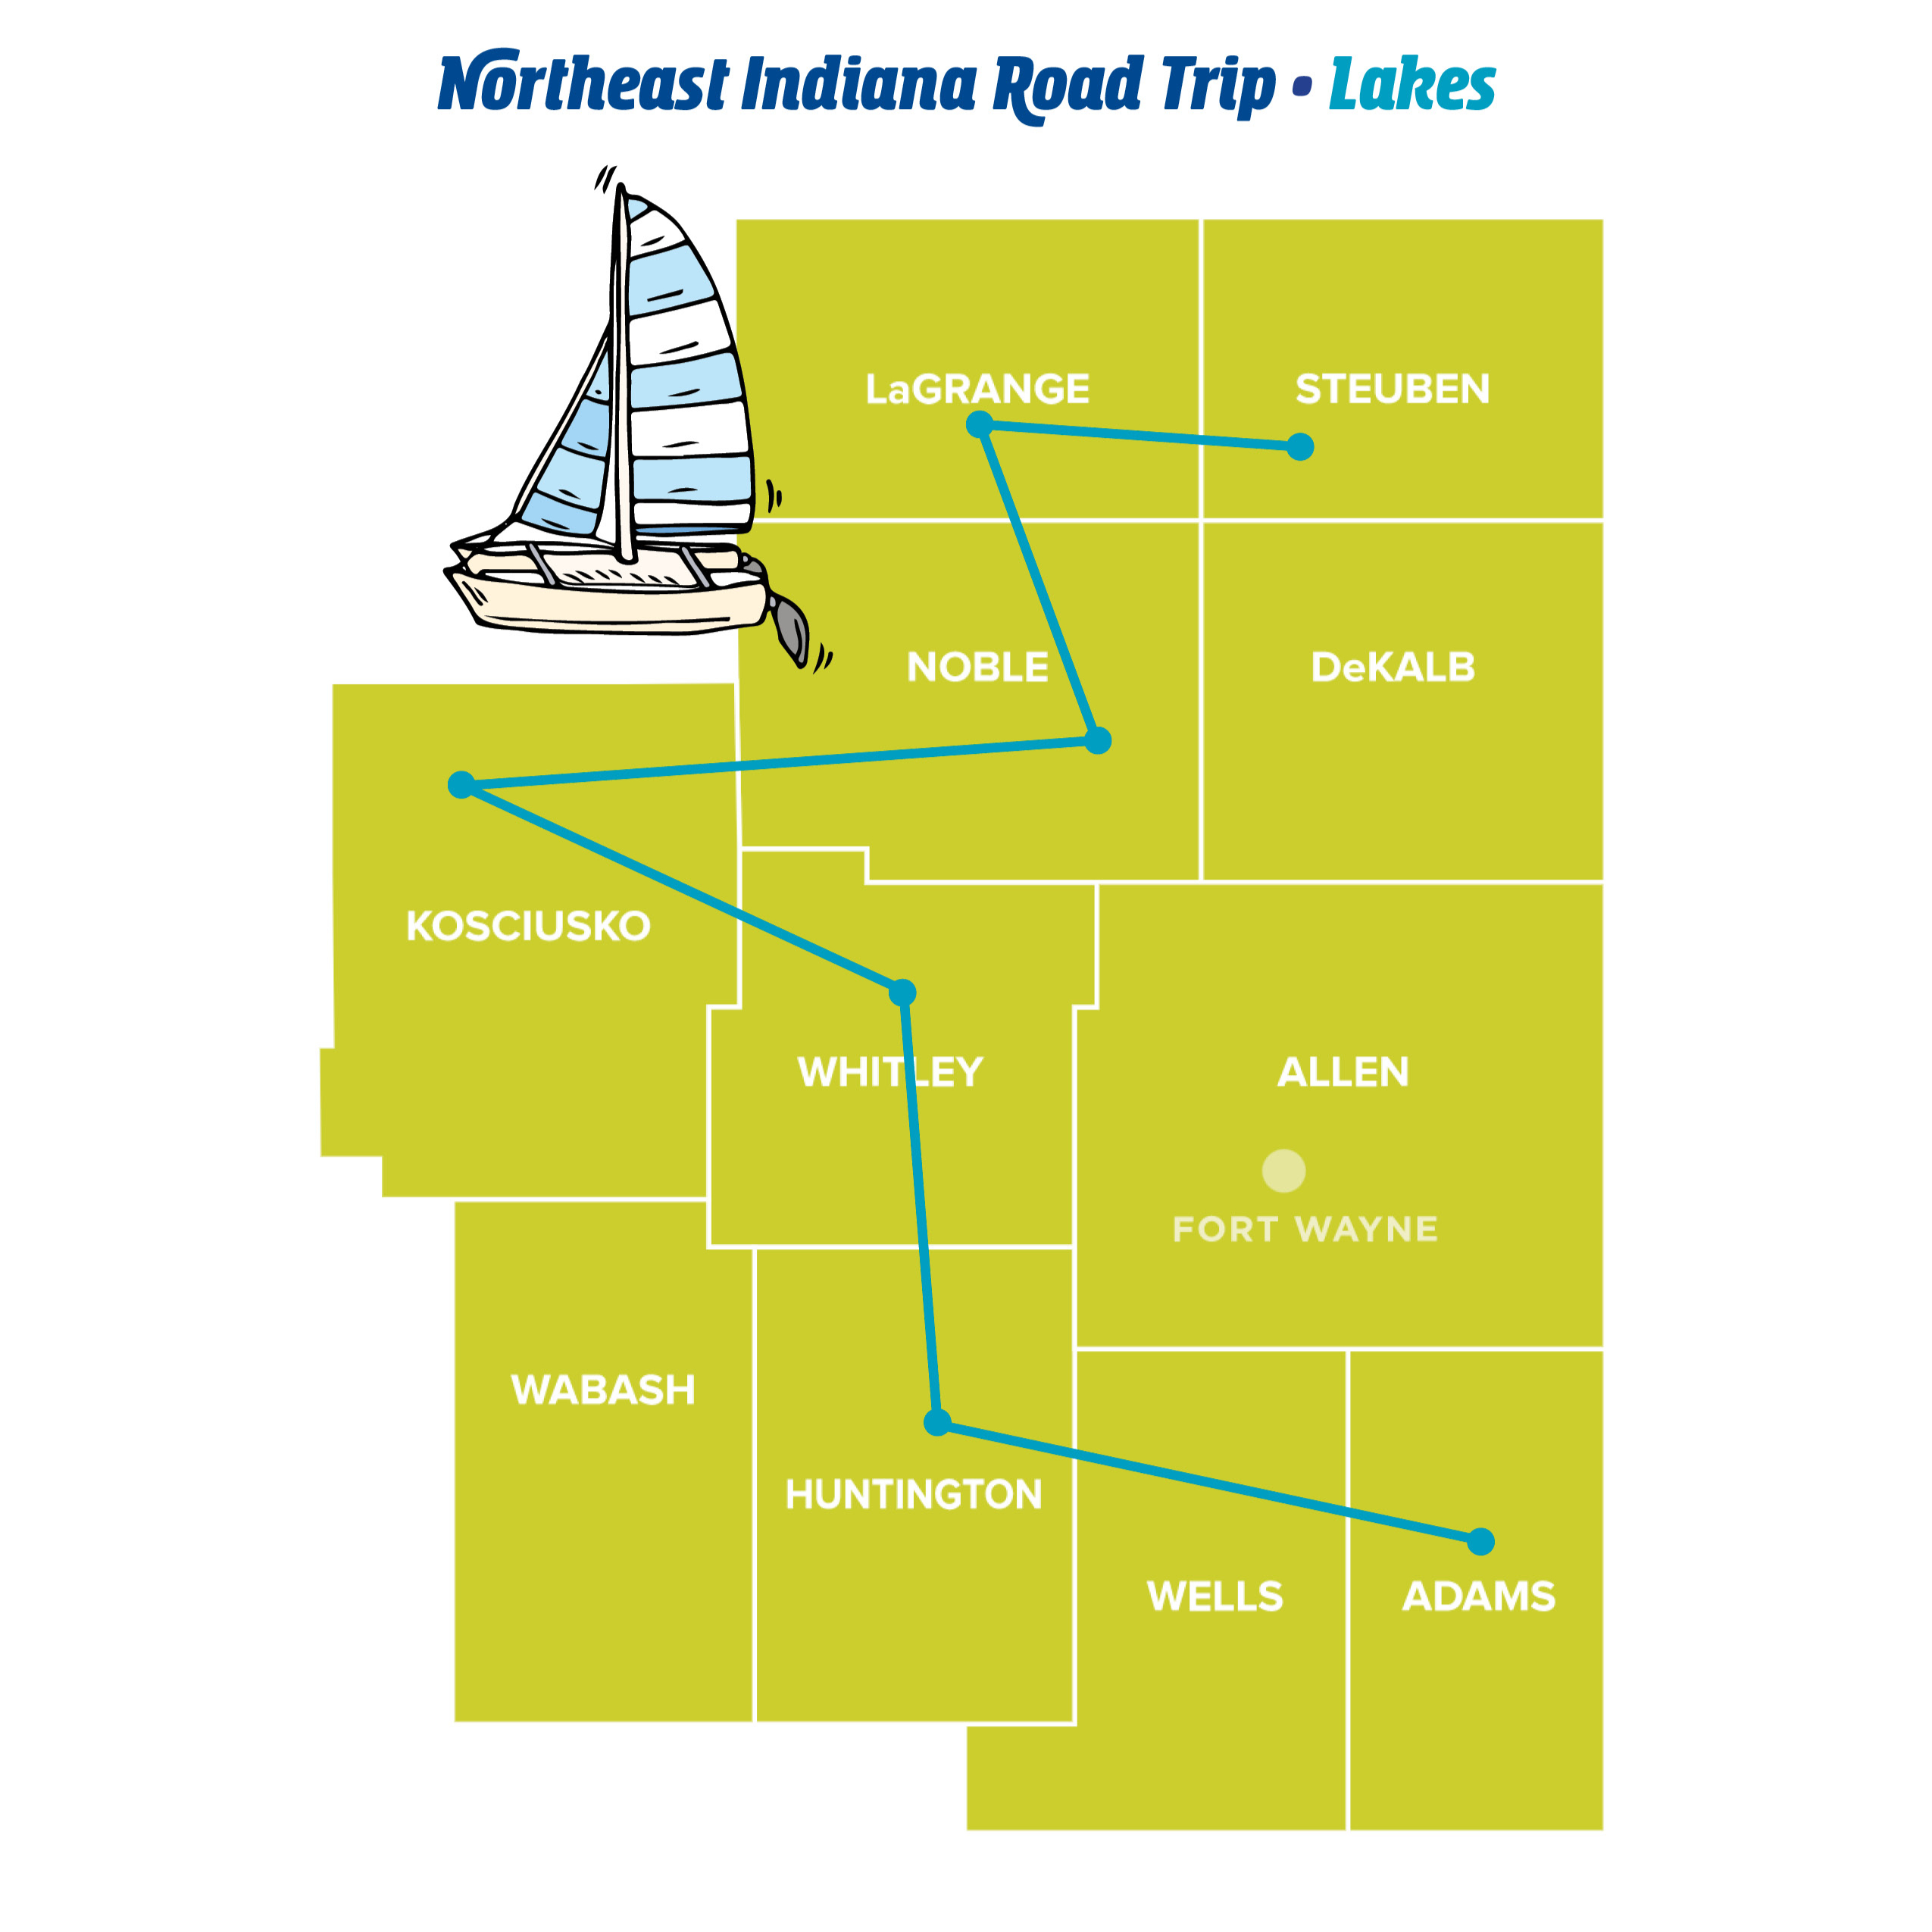 Lakes - Northeast Indiana Road Trips